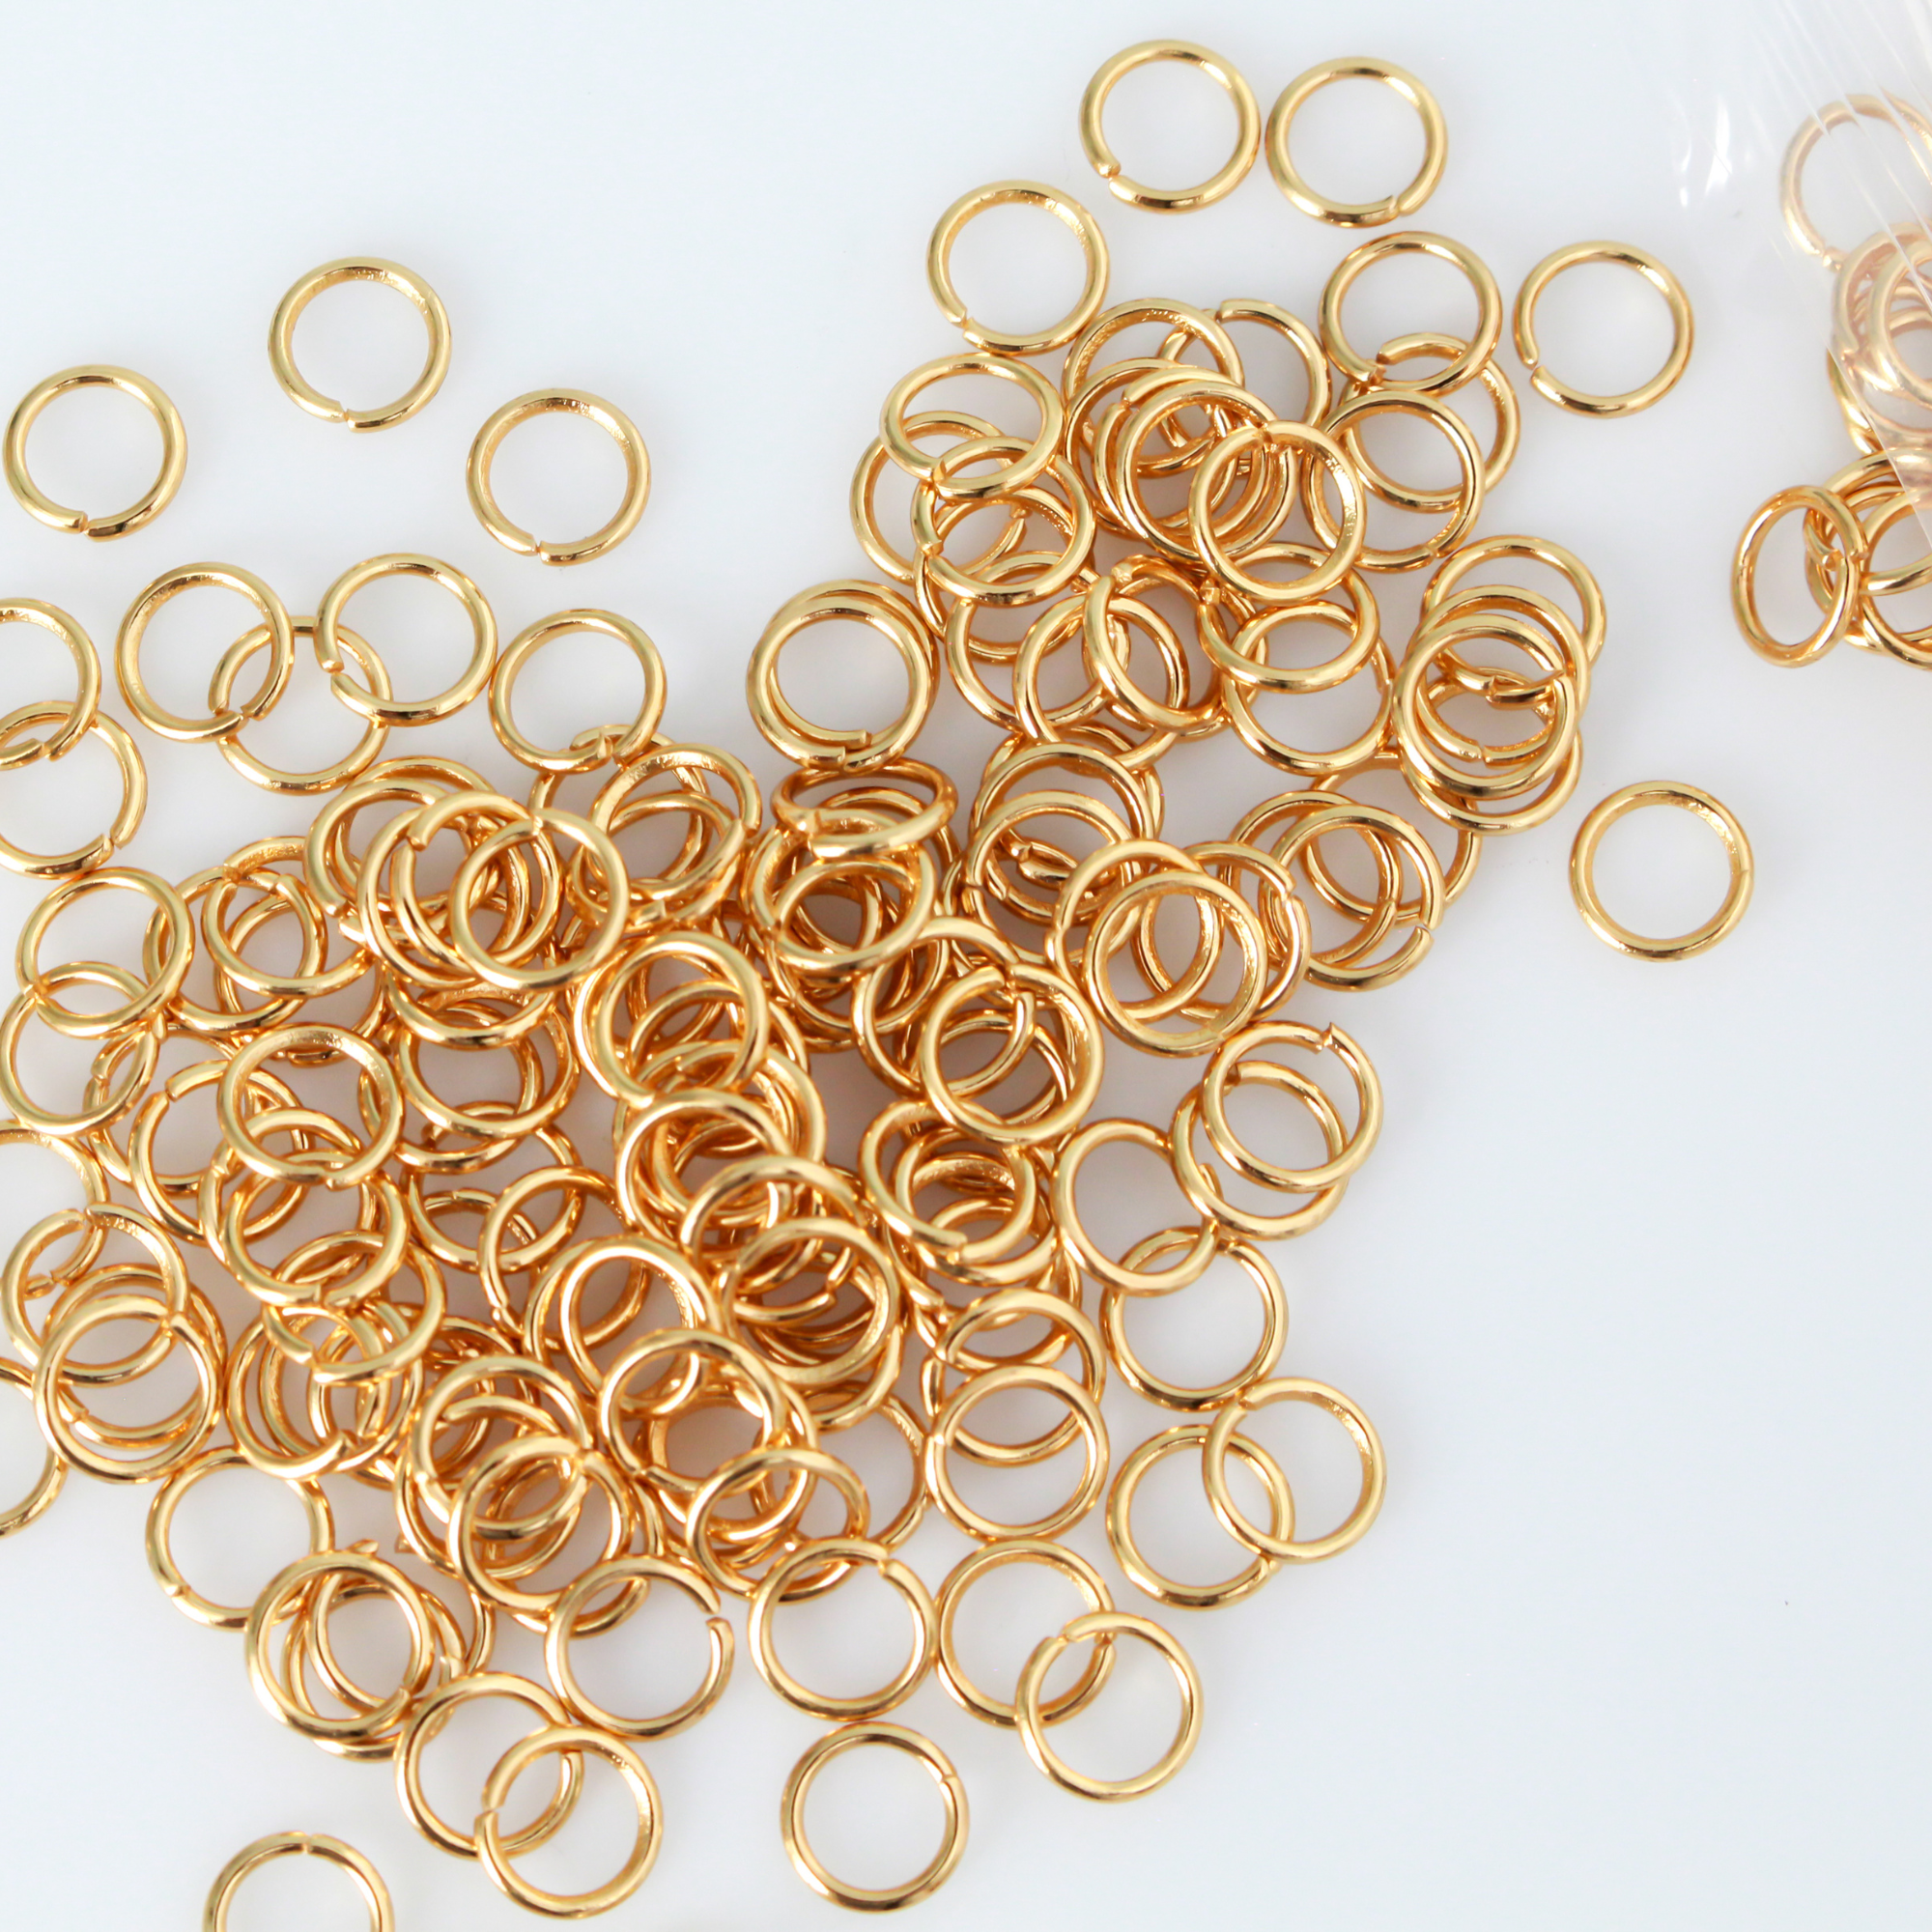 Stainless Steel Jump Rings, 24K Gold Plated, 6mmx0.8mm (20 Gauge) 100pcs